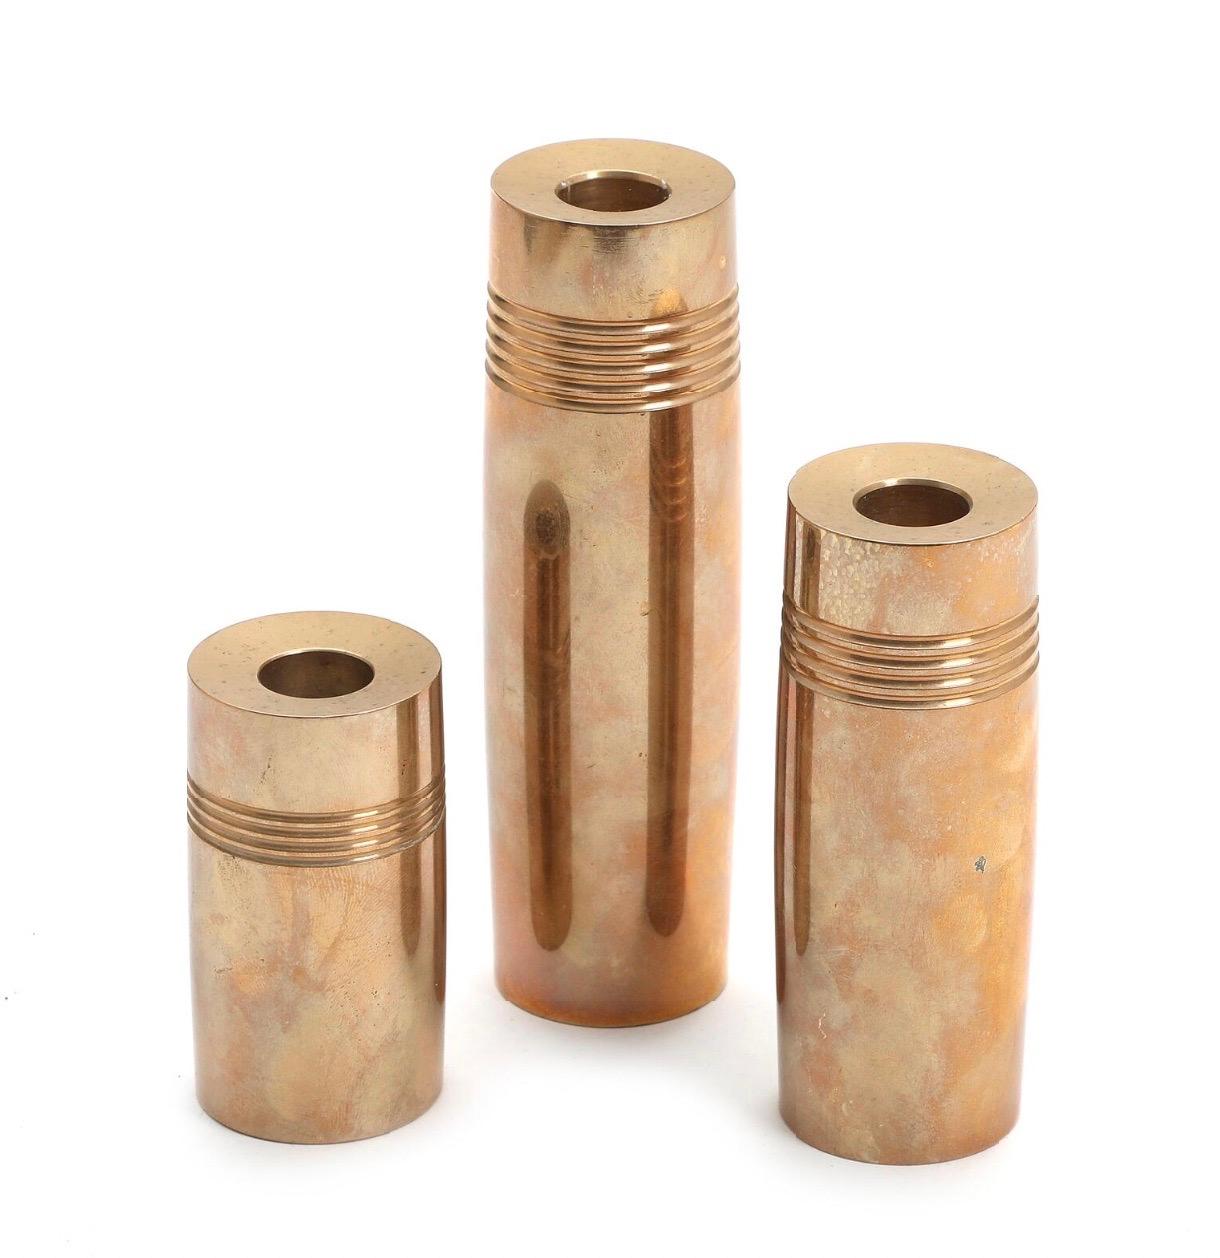 Set of 3 bronze cylindrical candleticks 

Measuring approx 3.5